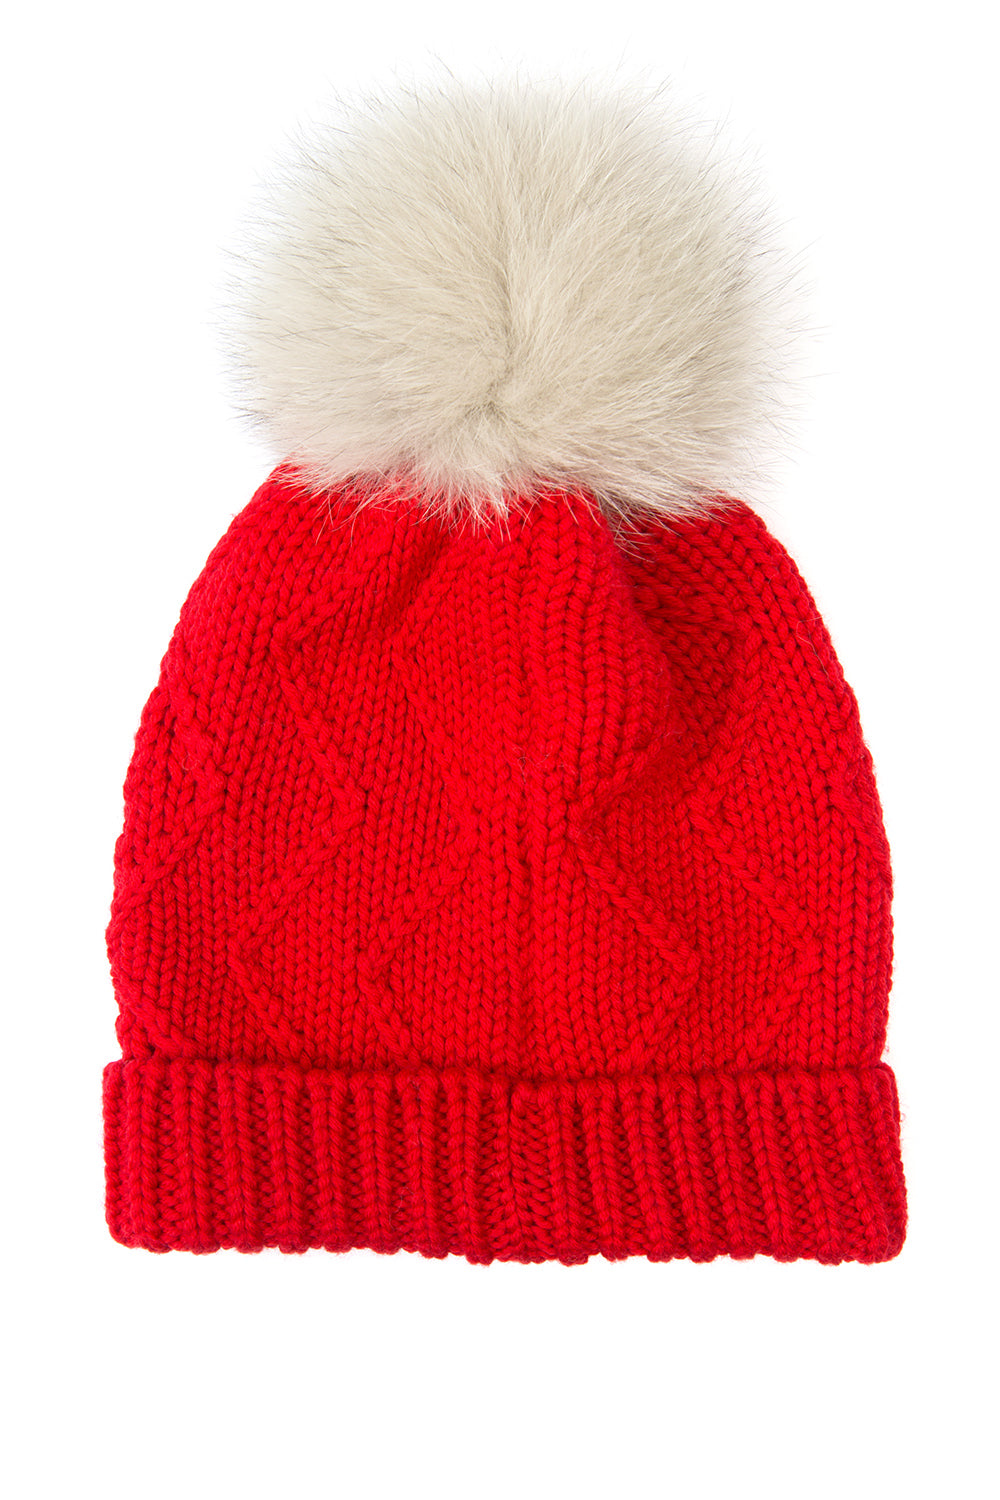 Woolrich Serenity Ladies Ribbed Bobble Hat Red - Laid Flat Back View